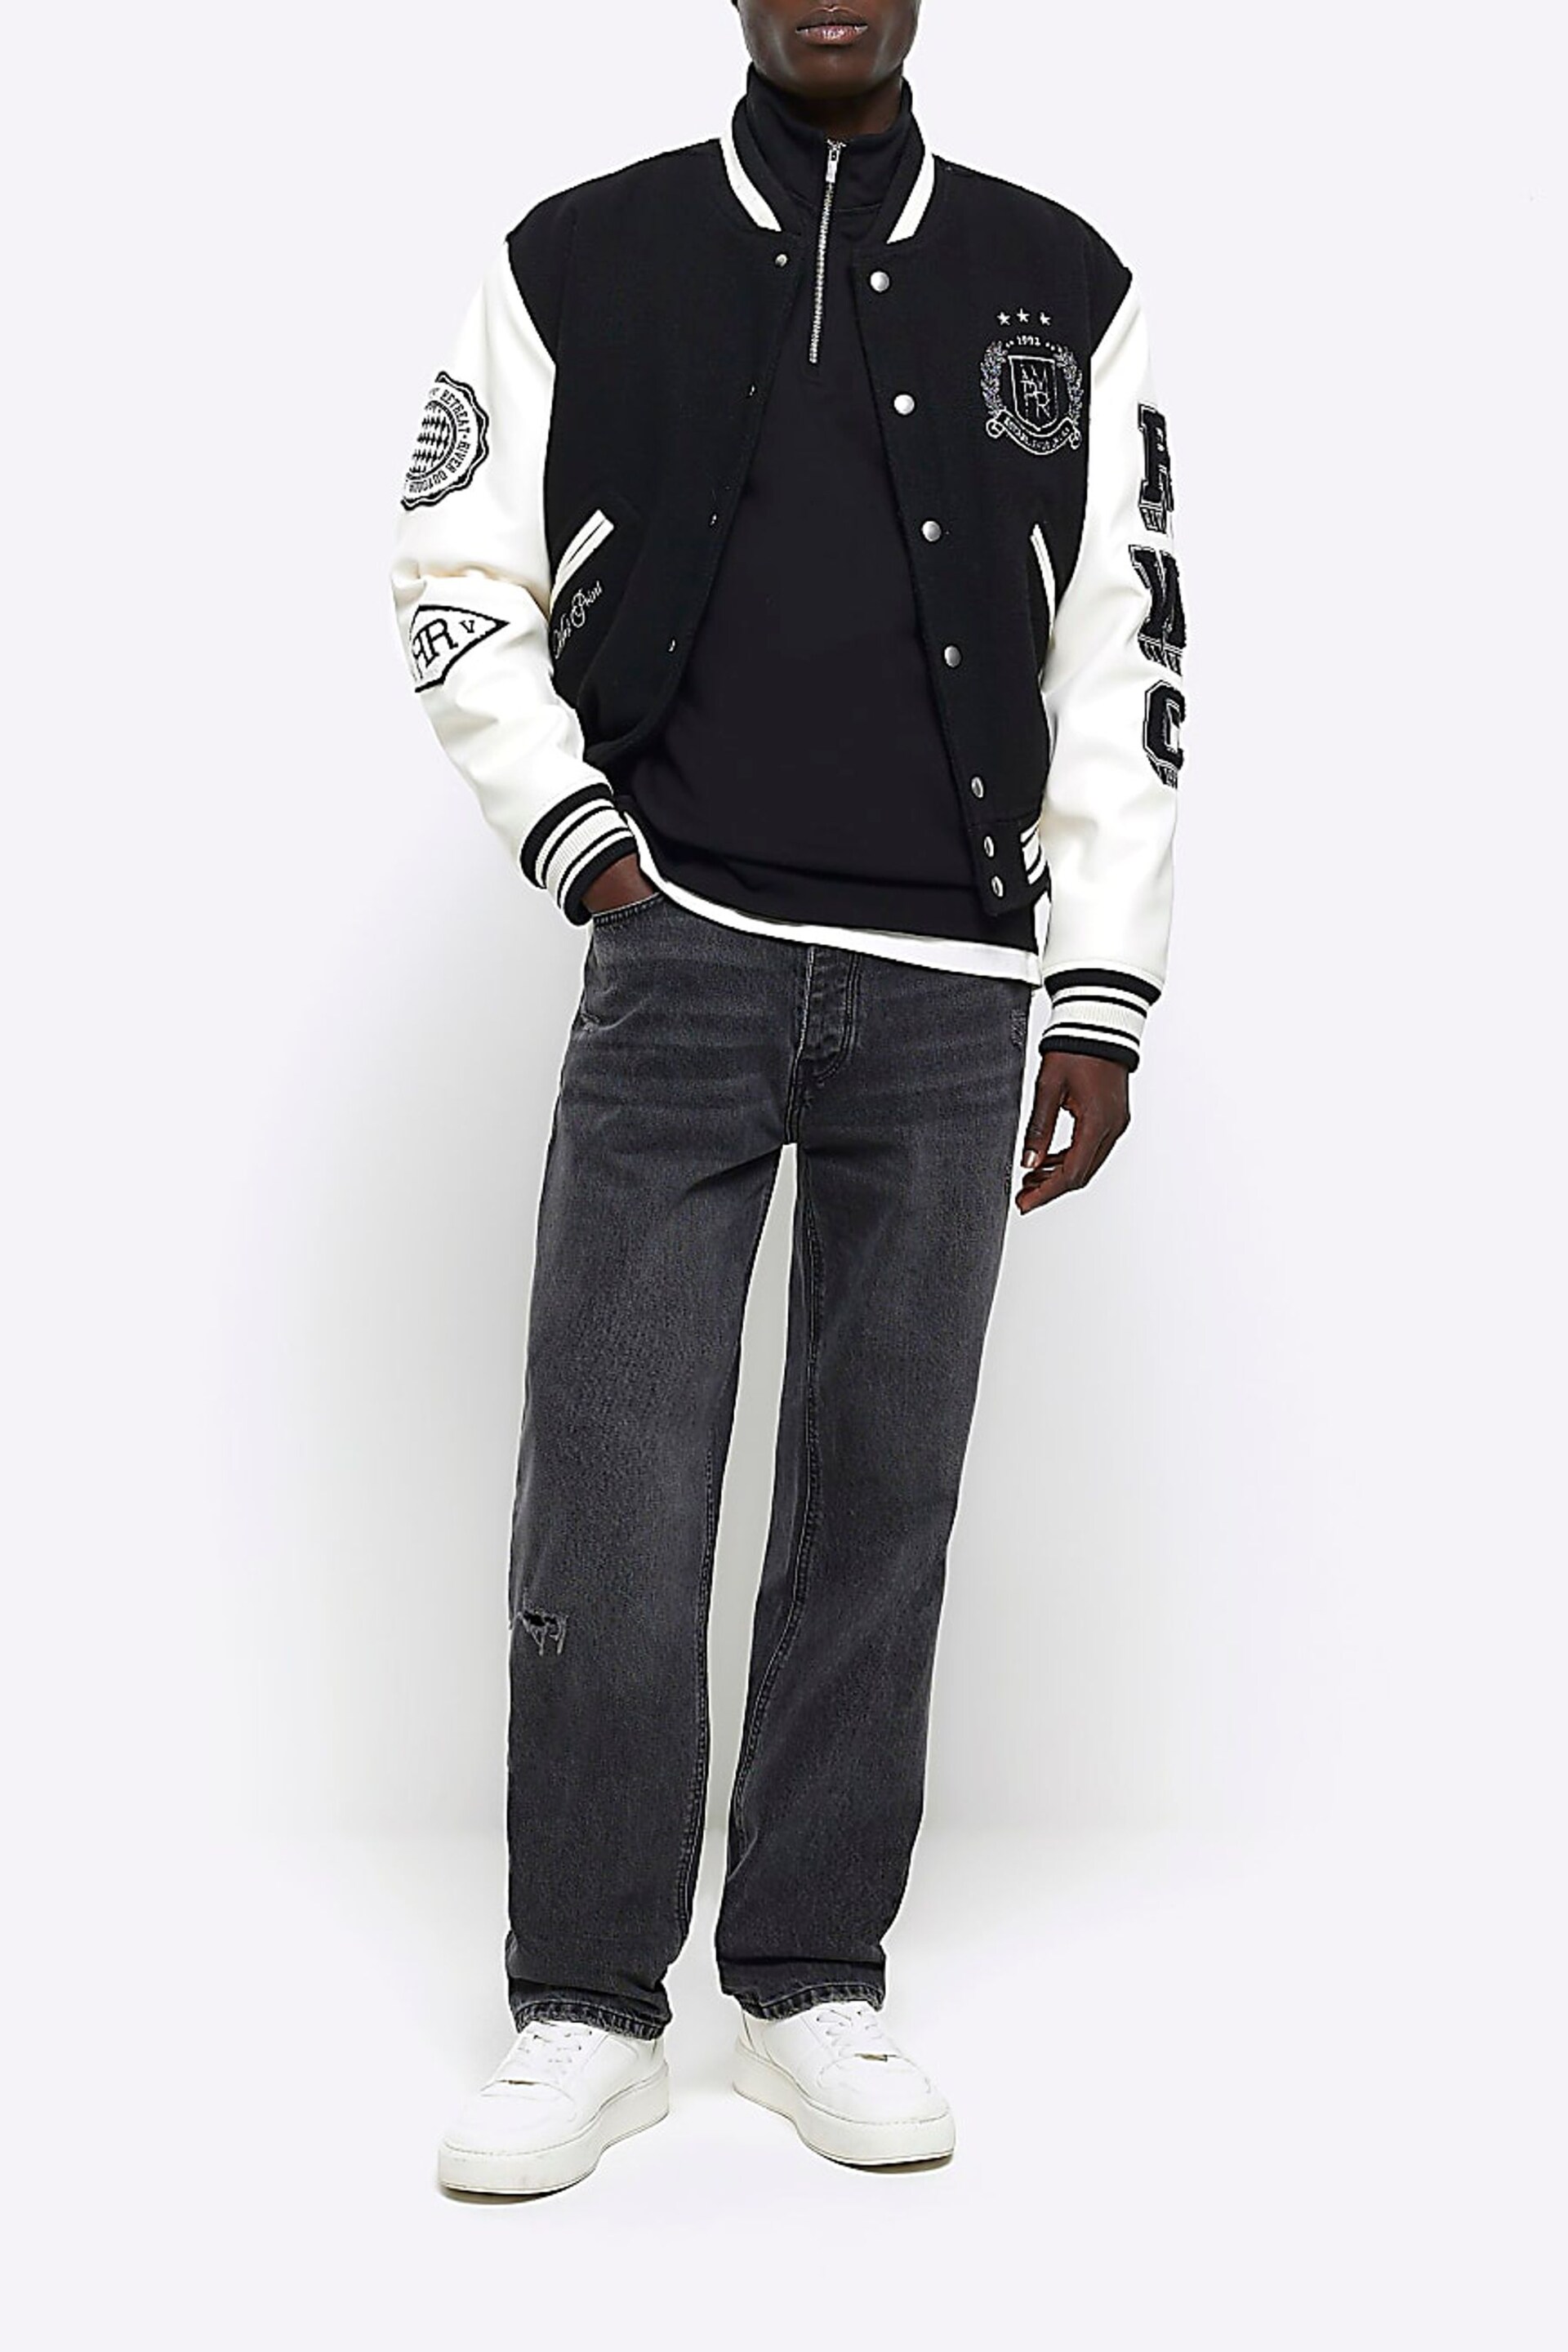 River Island Black Funnel Neck Polo Hoodie - Image 3 of 4